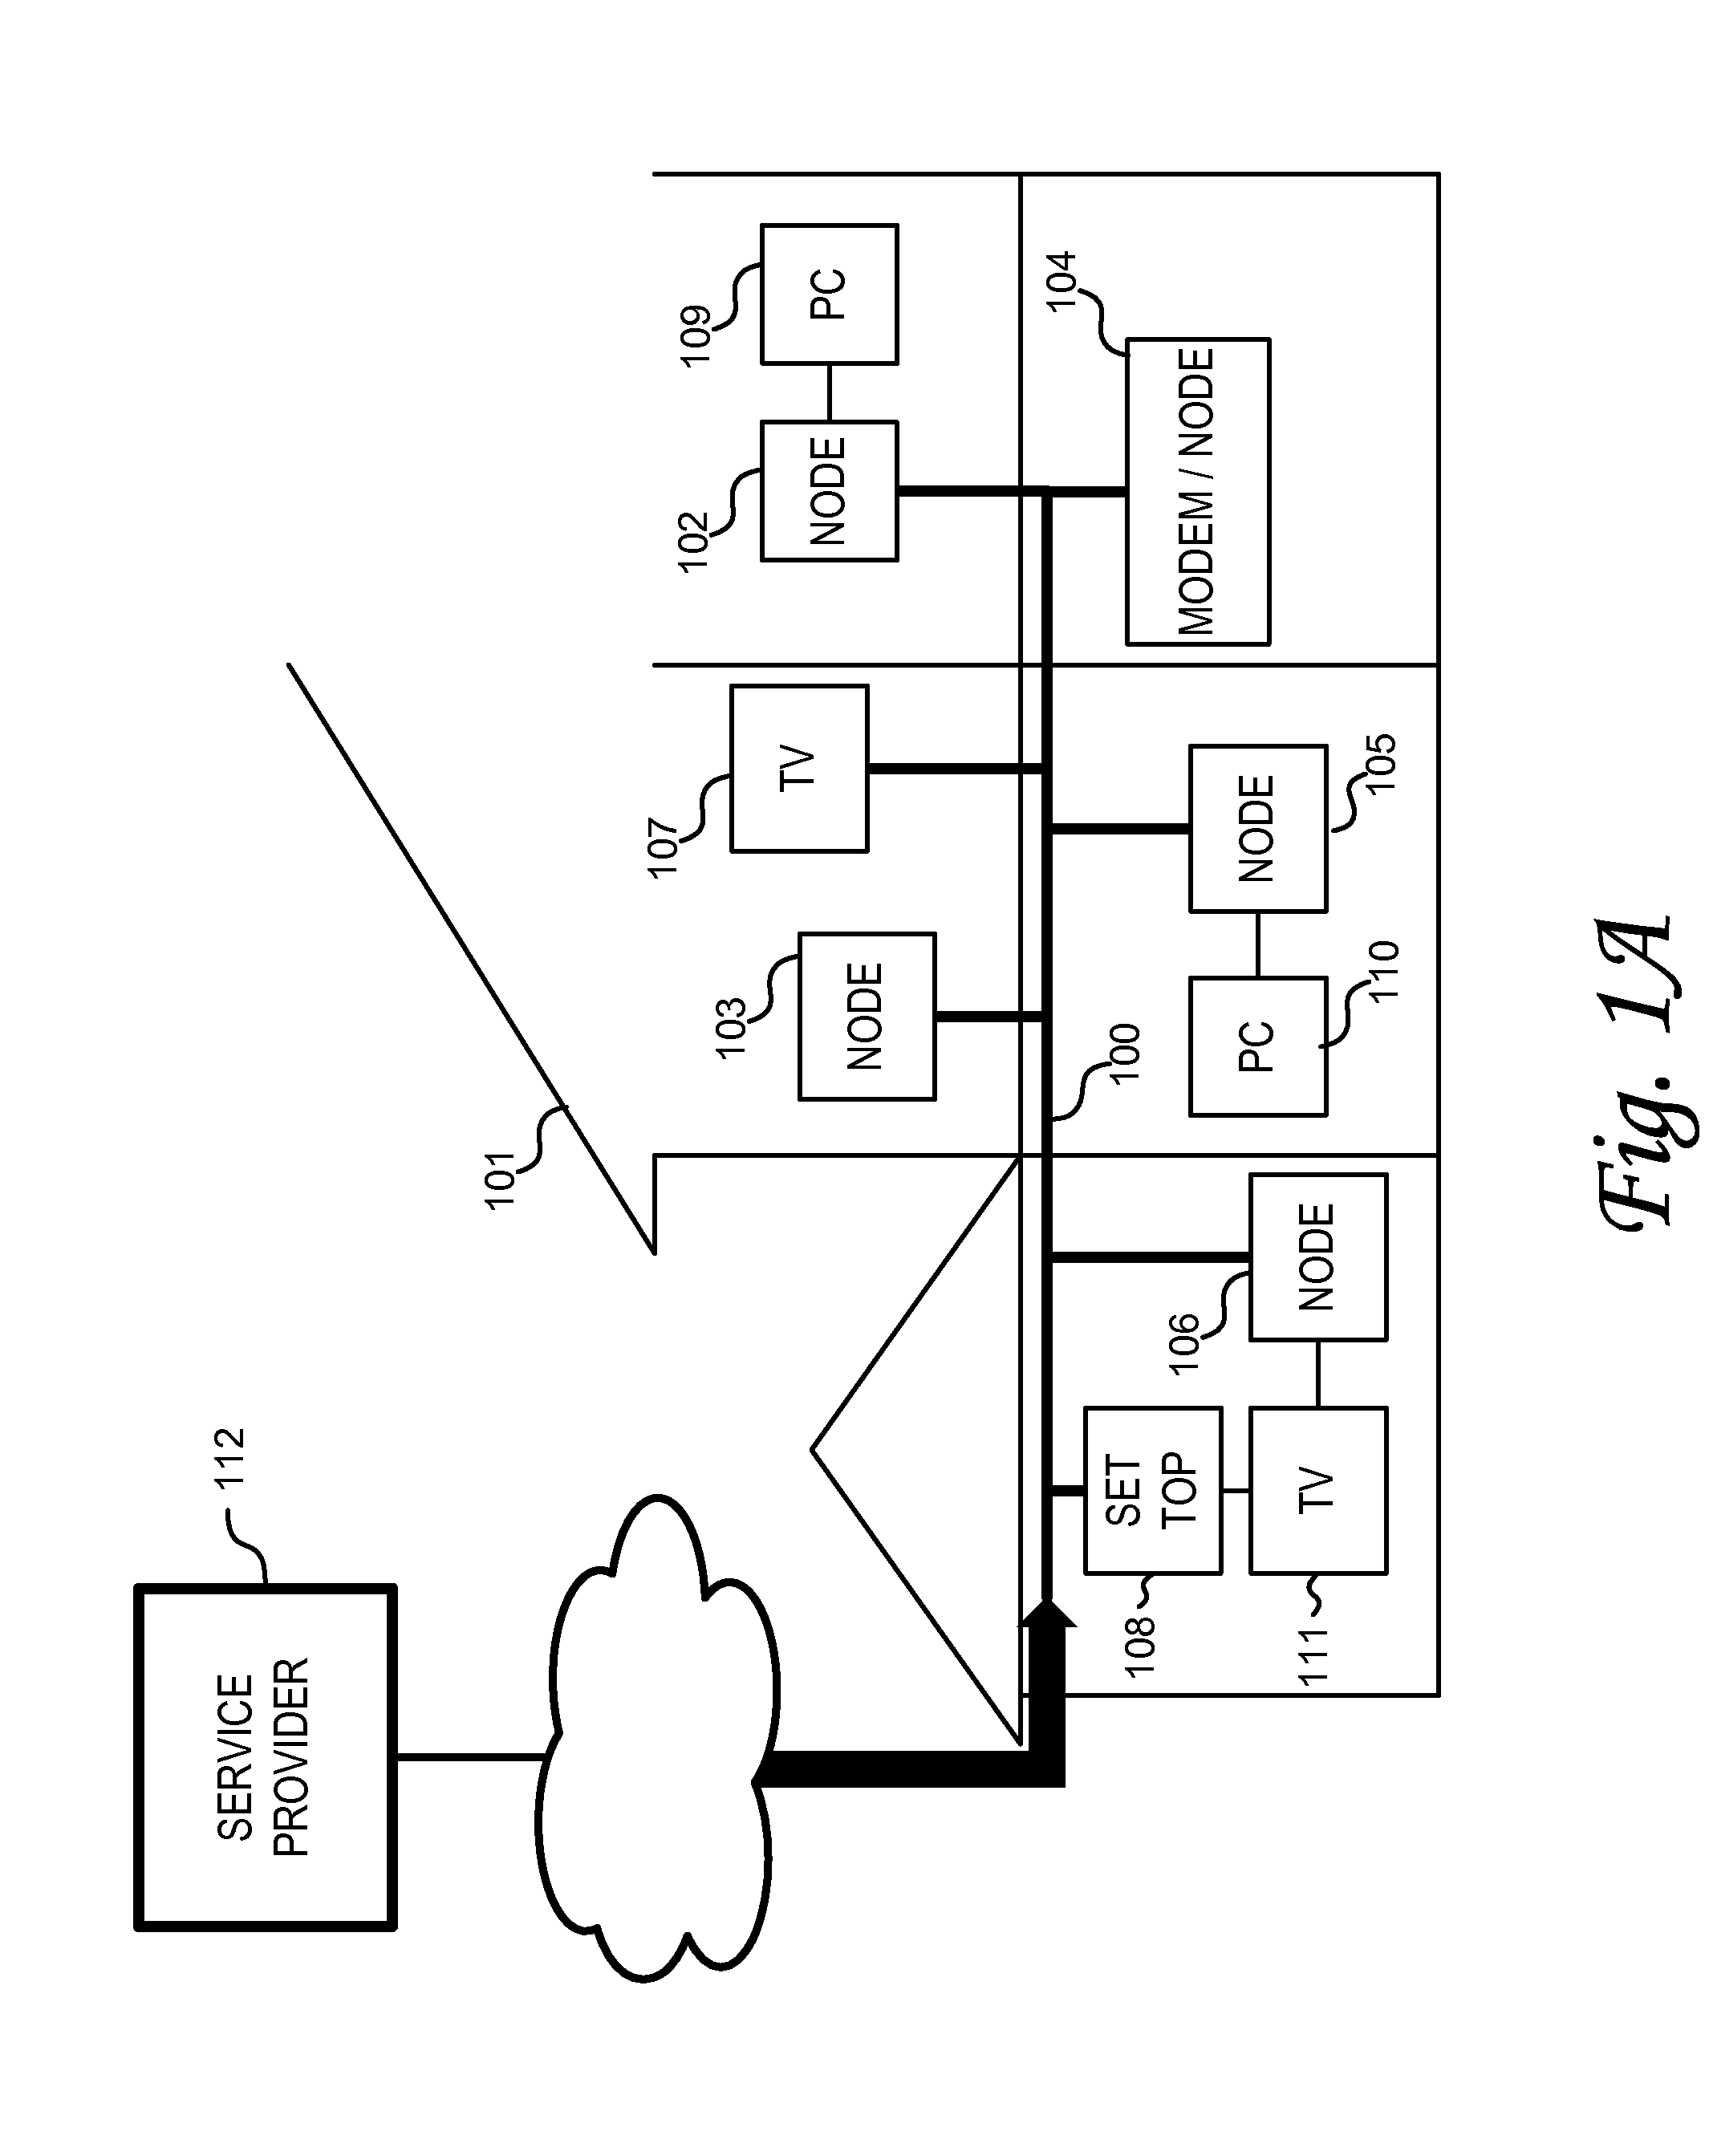 Flexible Reservation Request and Scheduling Mechanisms in a Managed Shared Network with Quality of Service